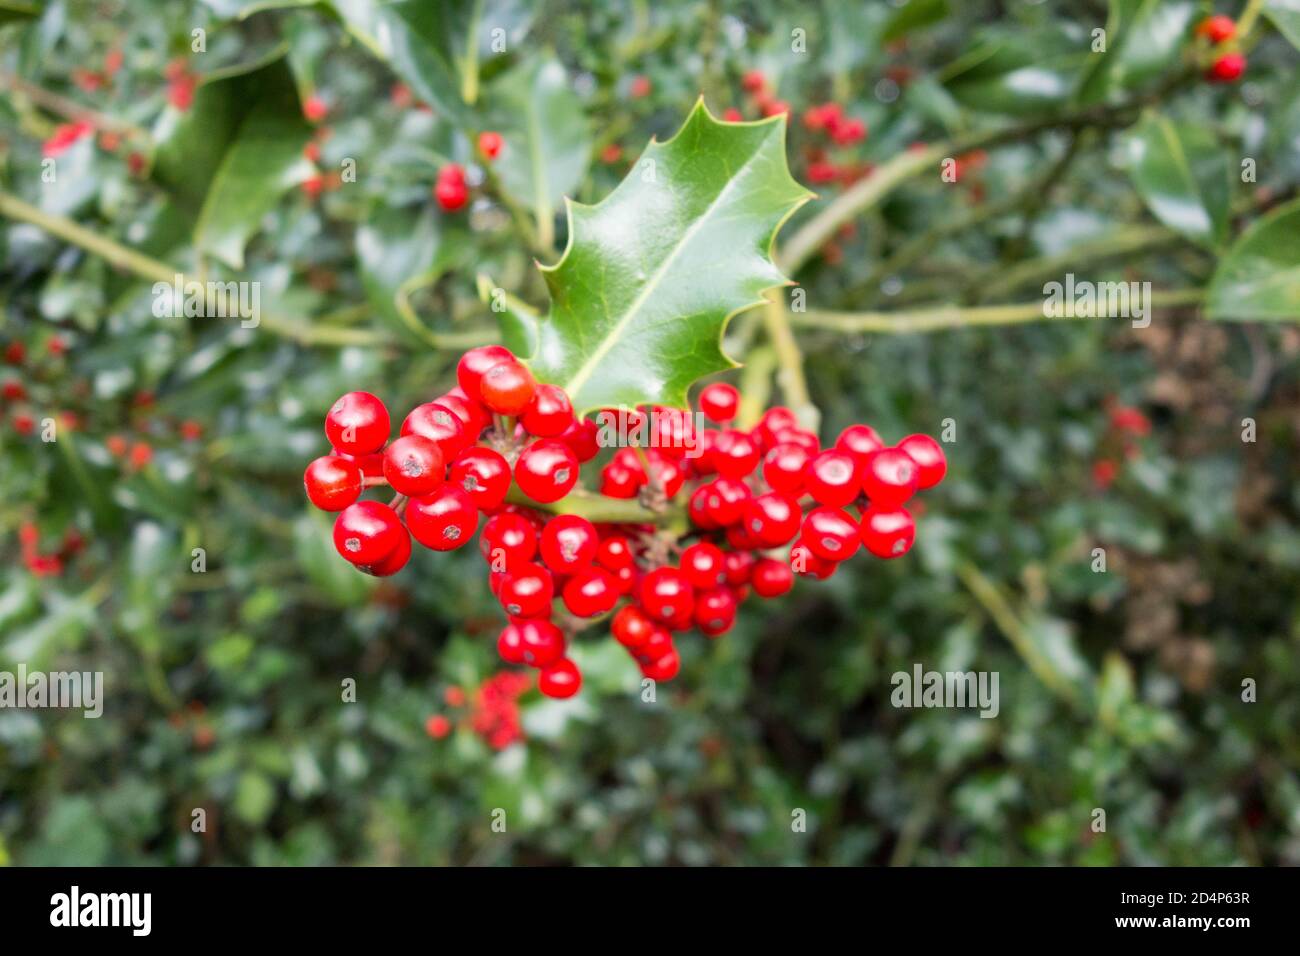 are nellie stevens holly berries poisonous to dogs